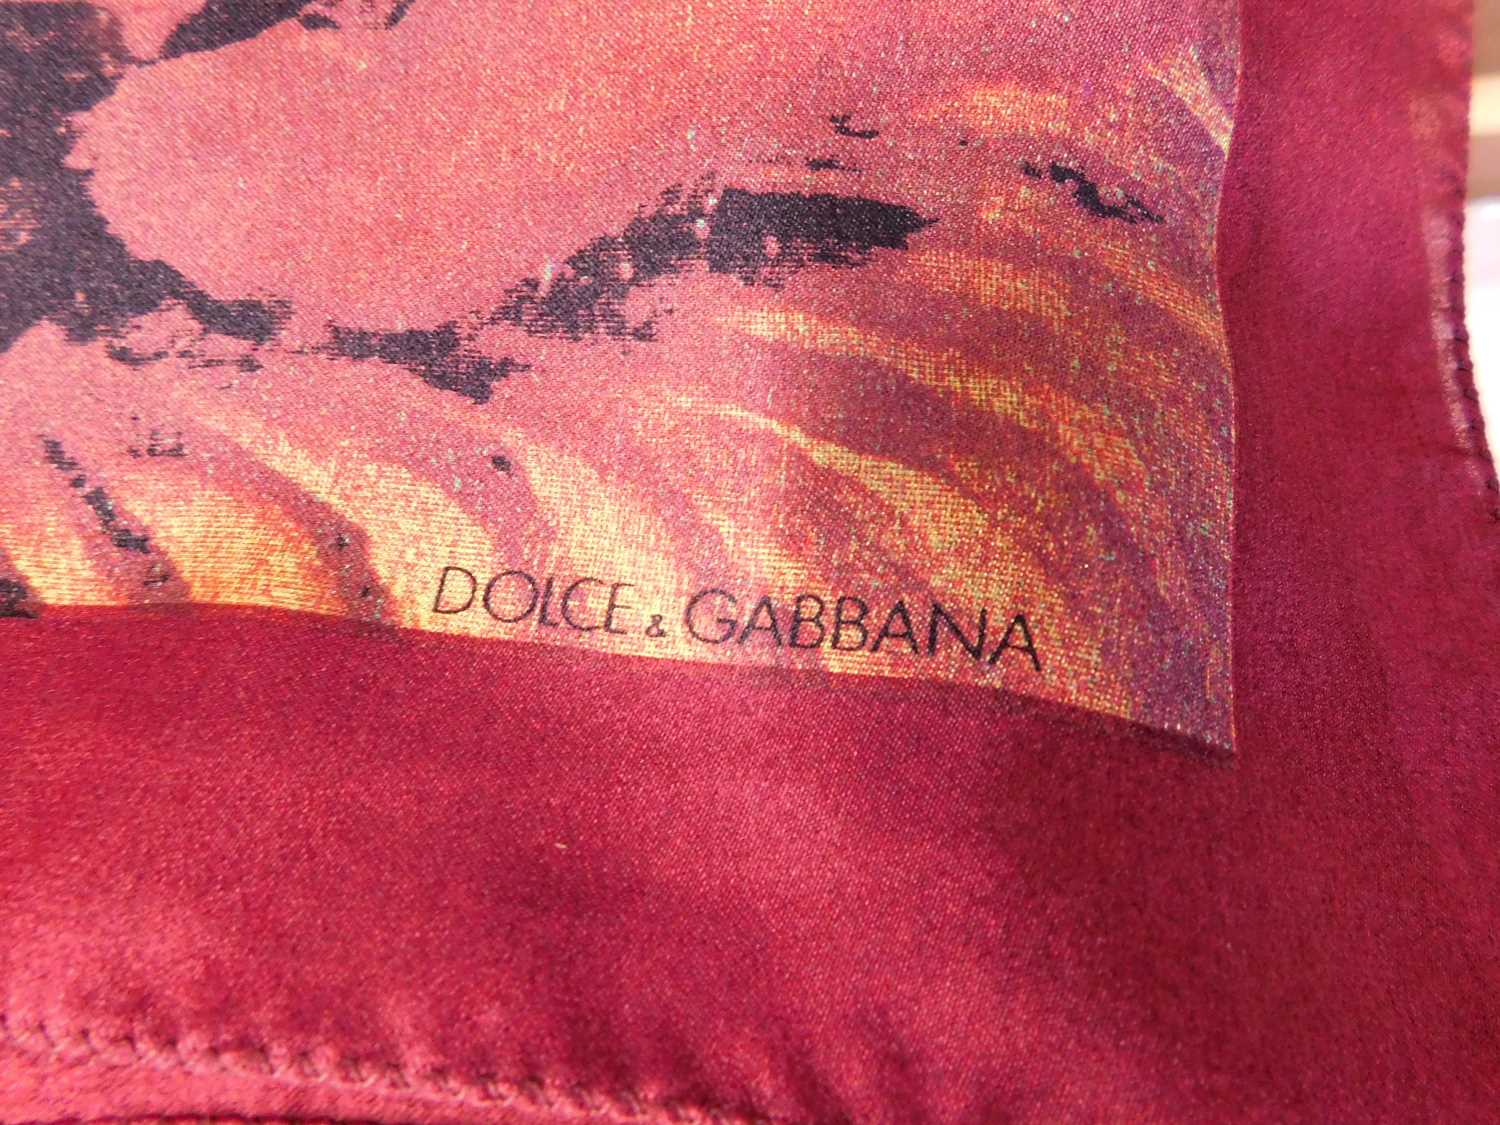 A silk scarf by Dolce & Gabbana, approx. 85 x 85cm - Image 3 of 3